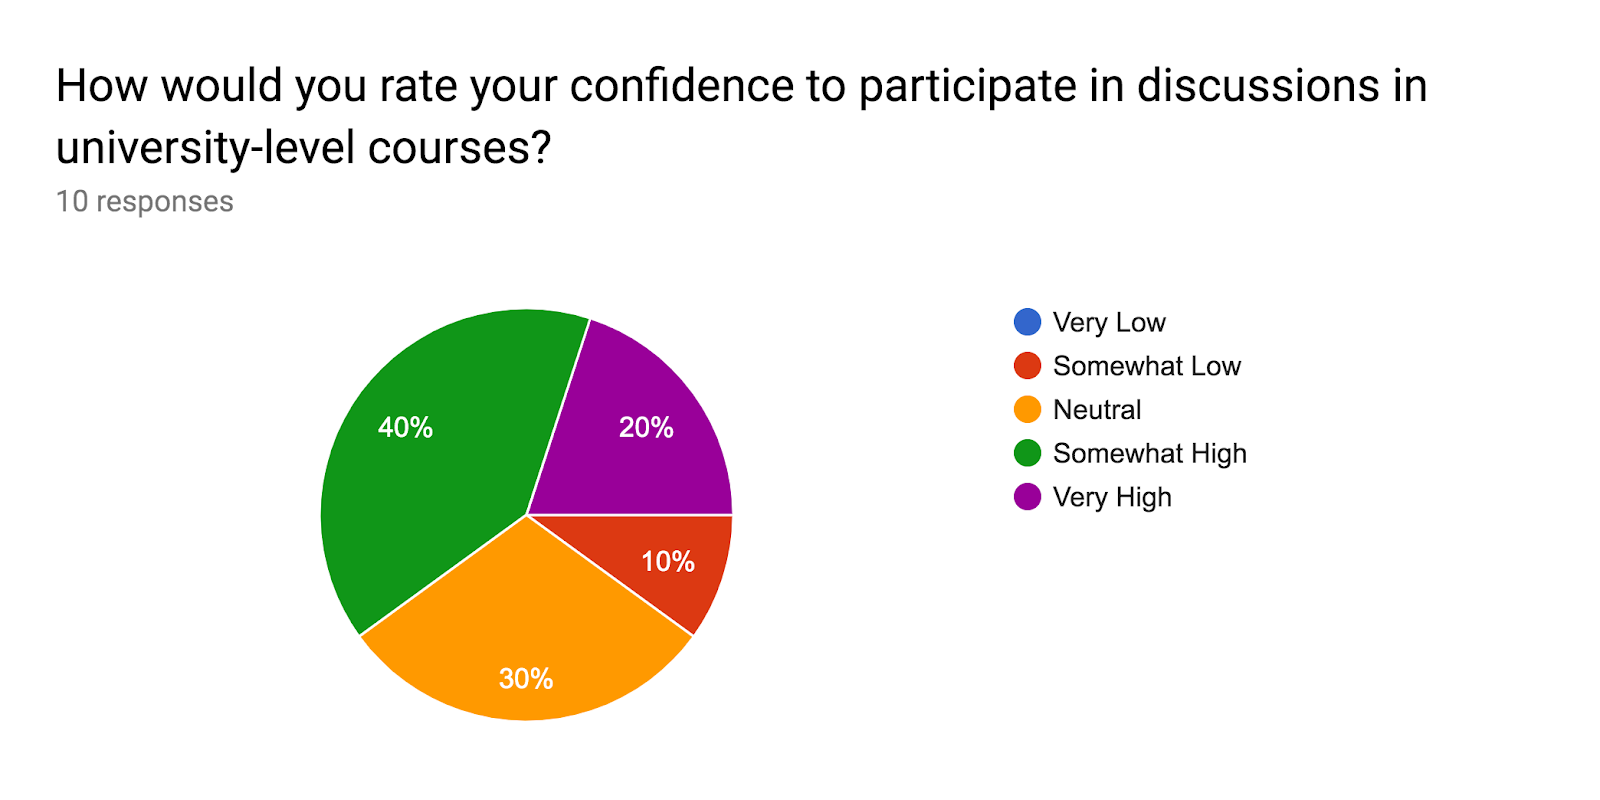 Forms response chart. Question title: How would you rate your confidence to participate in discussions in university-level courses?. Number of responses: 10 responses.